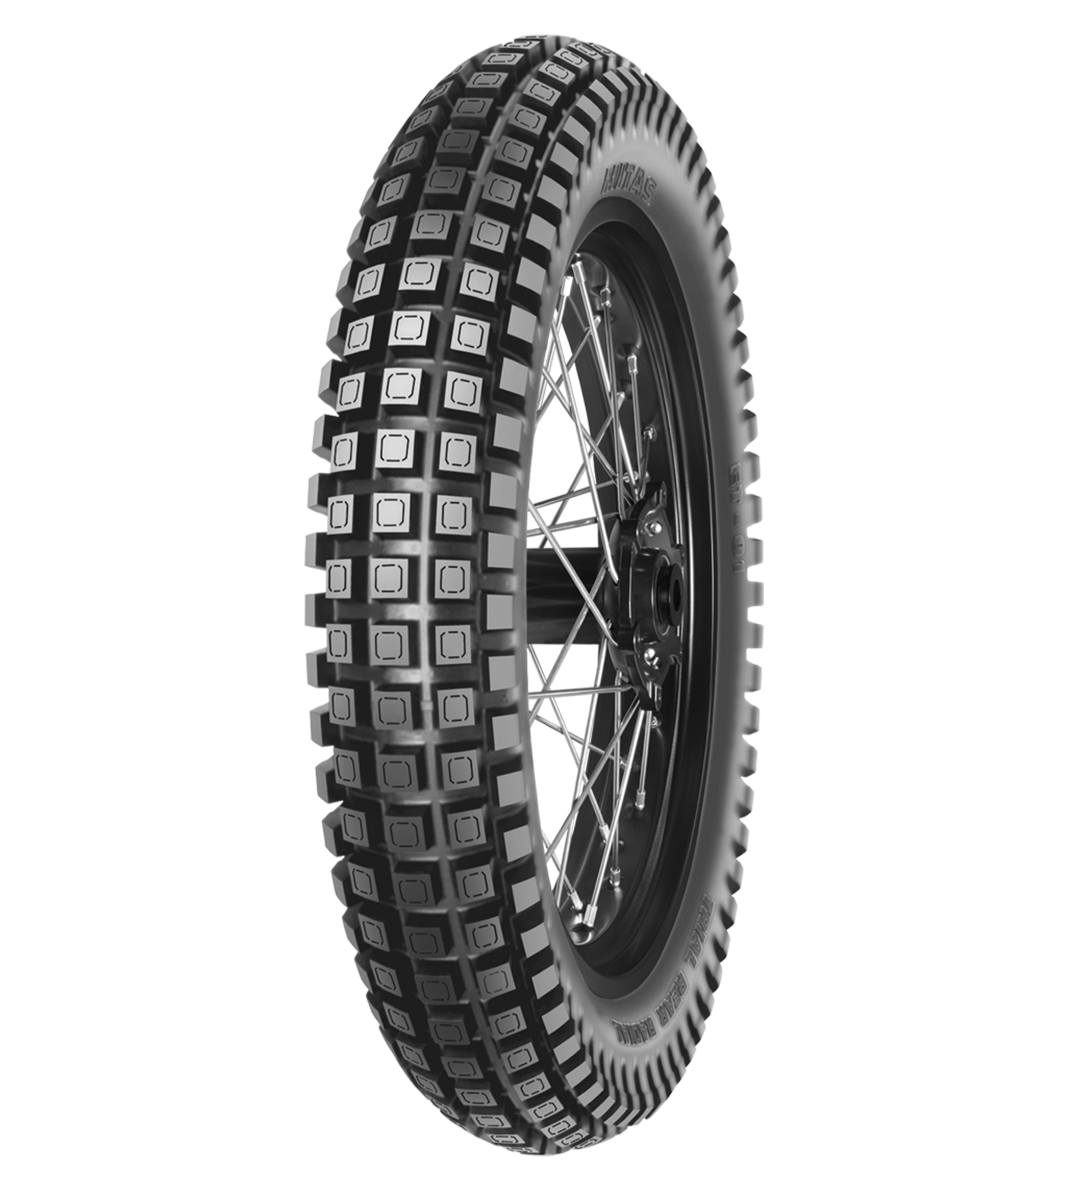 Mitas ET-01 Trial 2.75-21 Trial Off-Road 45M No Stripe Tubeless Front Tire, 224667, 2.75-21, E Series, ET-01 Trials, Front, Off-Road, Trials, Tires - Imported and distributed in North &amp; South America by Lindeco Genuine Powersports - Premier Powersports Equipment and Accessories for Motorcycle Enthusiasts, Professional Riders and Dealers.